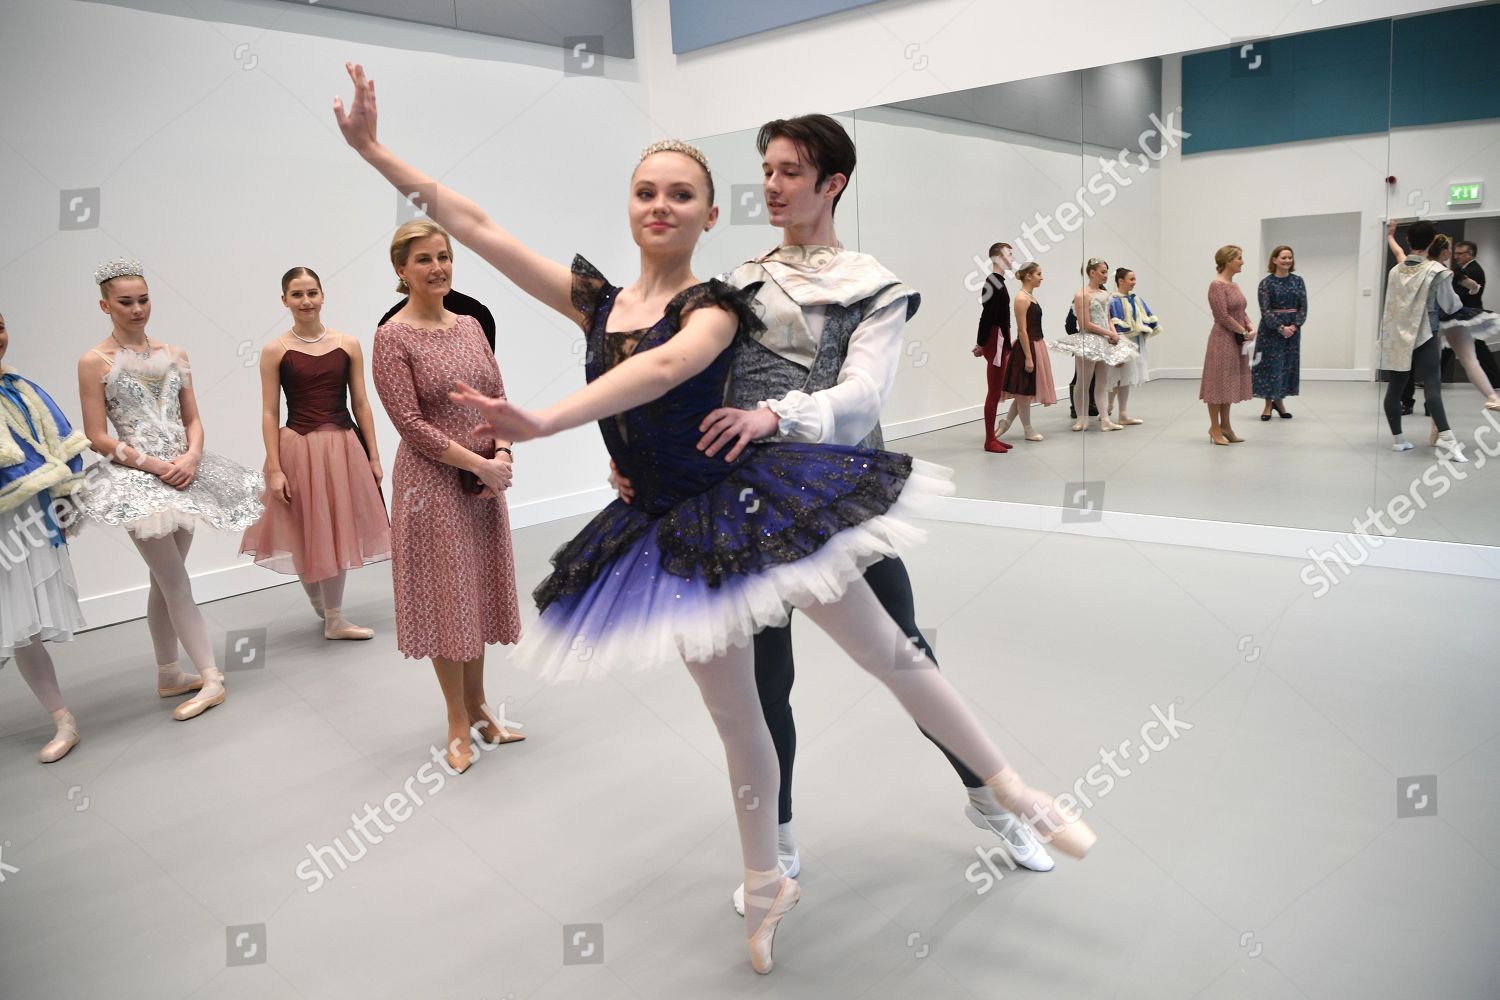 sophie-countess-of-wessex-opens-a-new-studio-for-central-school-of-ballet-london-uk-shutterstock-editorial-10568616j.jpg